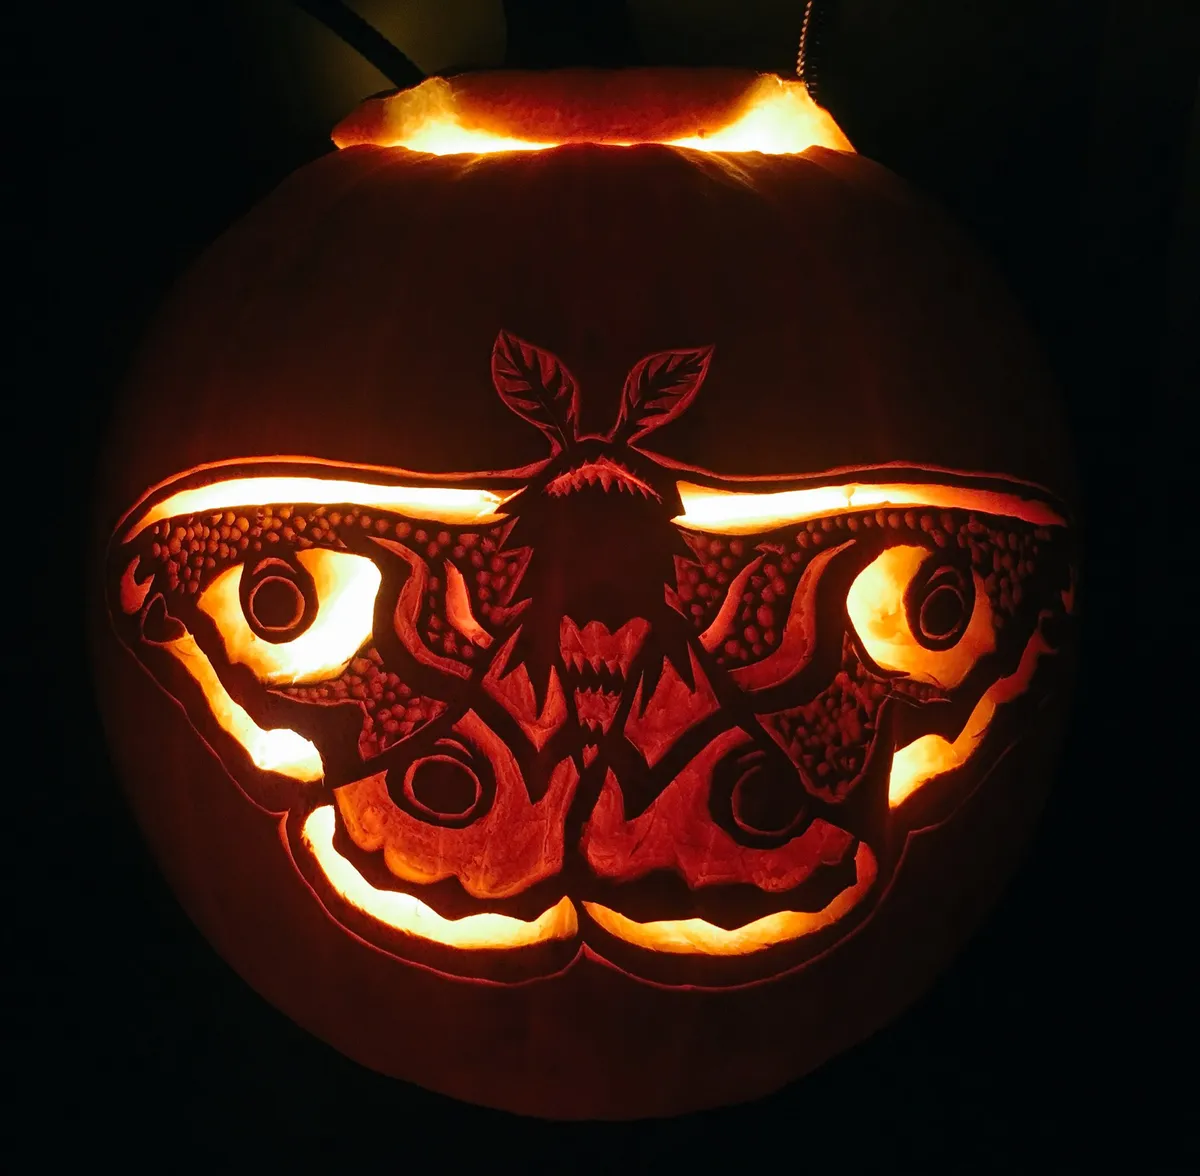 A pumpkin in darkness, light up from within to show the carving of an emperor moth.